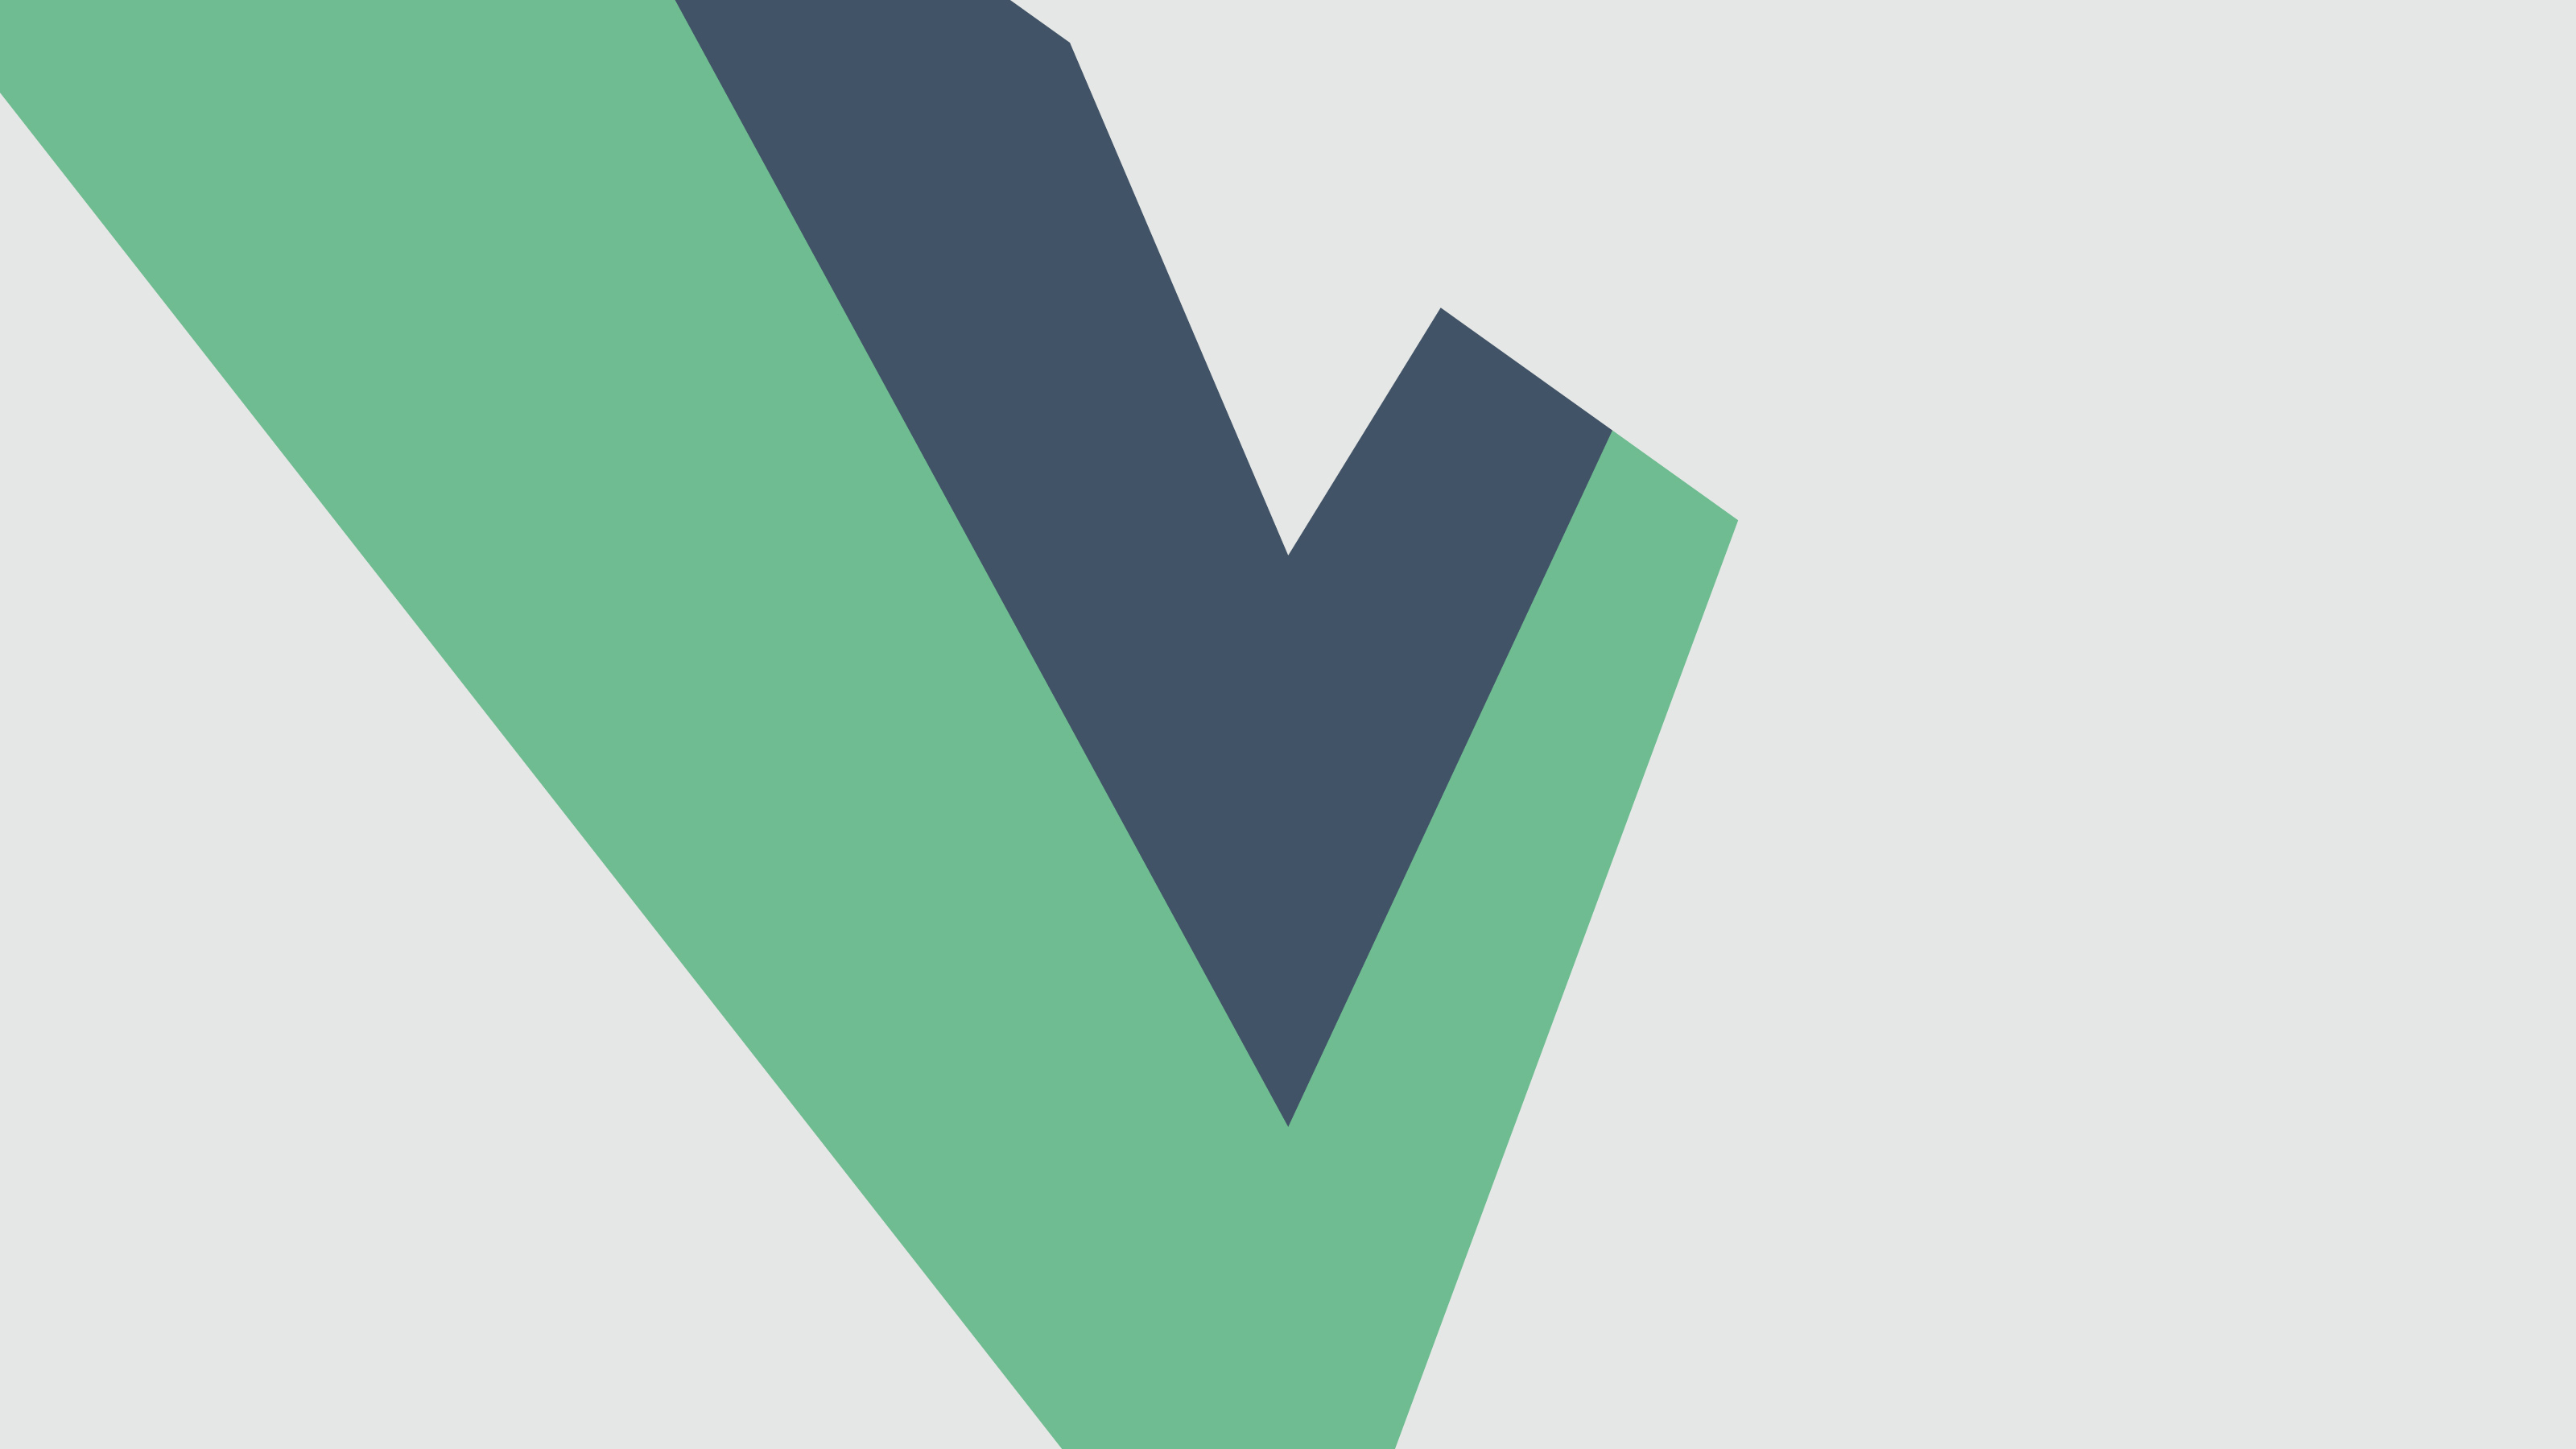 Easier Vue development with Vue States and Vue History